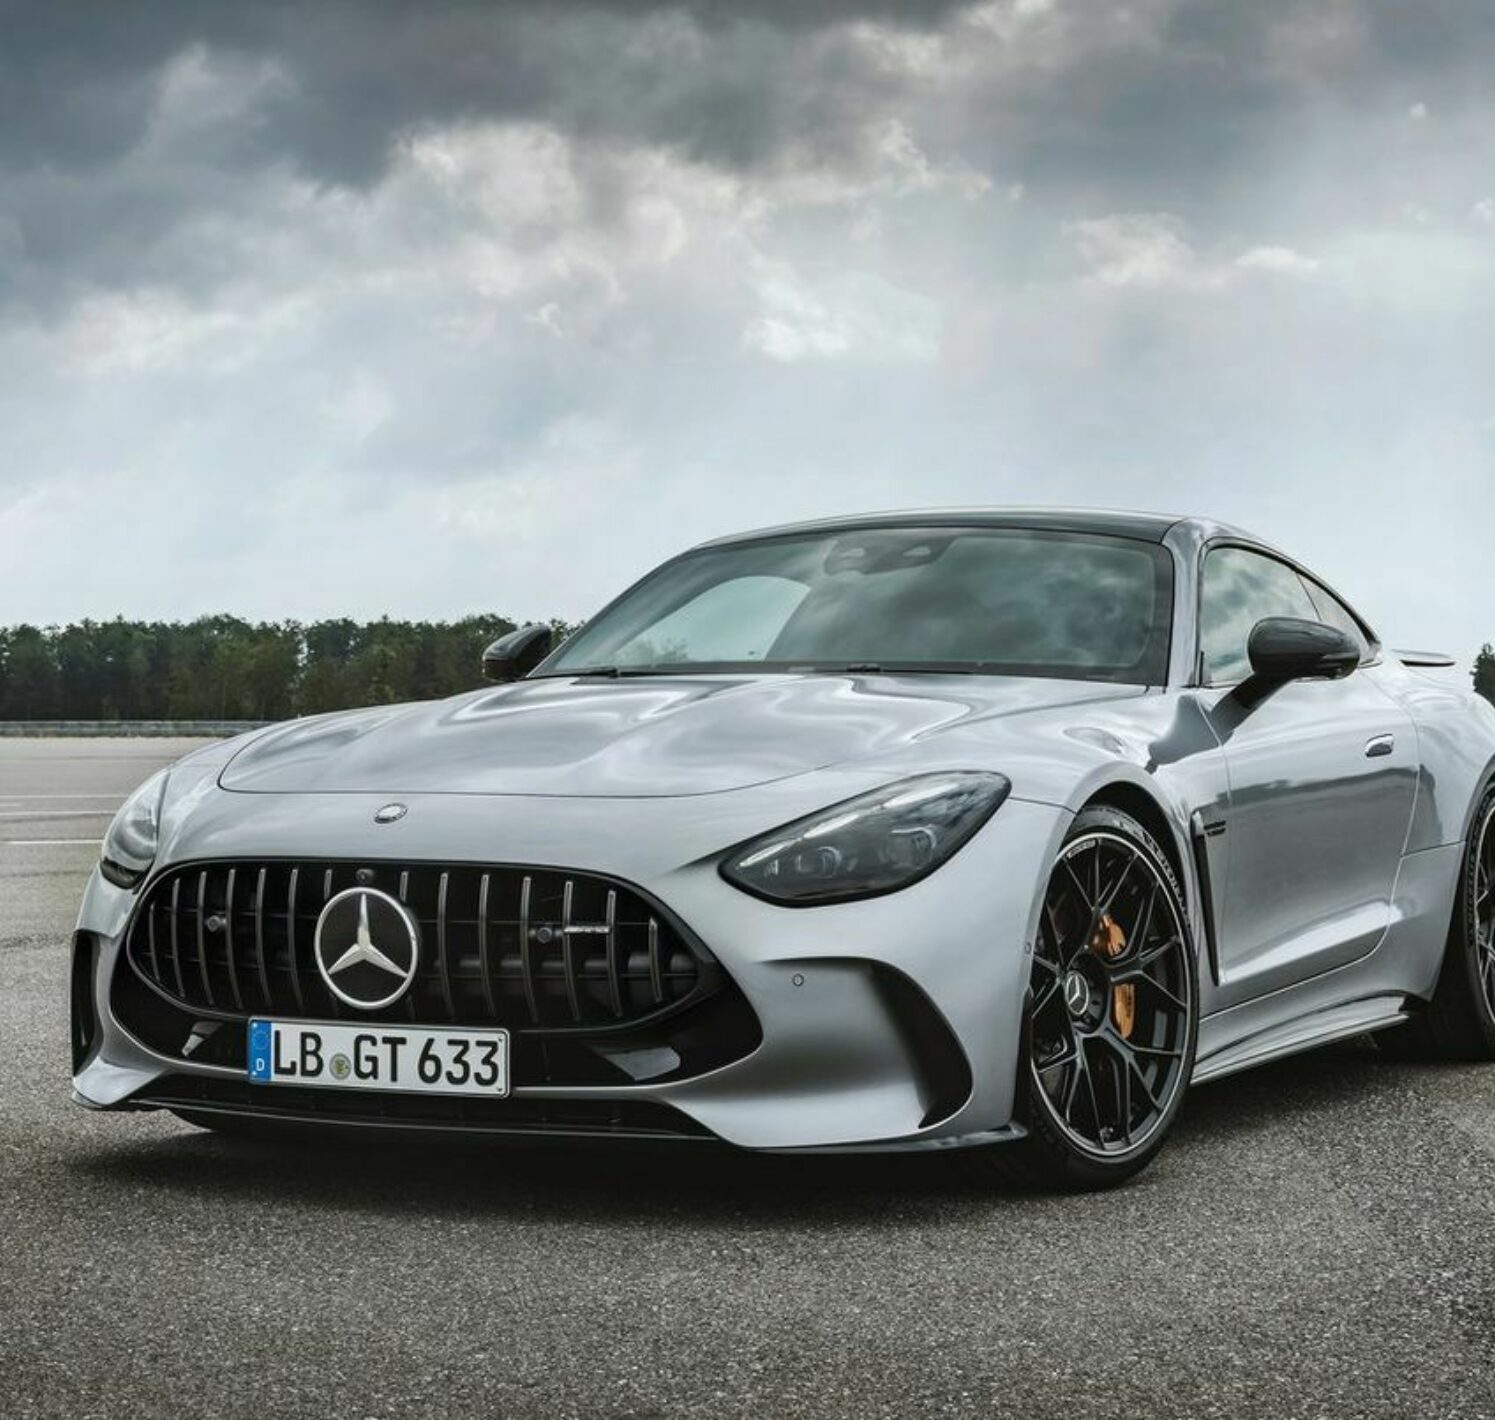 https://autofilter.sk/assets/images/amg-gt-kupe/gallery/mercedes-amg-gt-coupe-2-galeria.jpg - obrazok